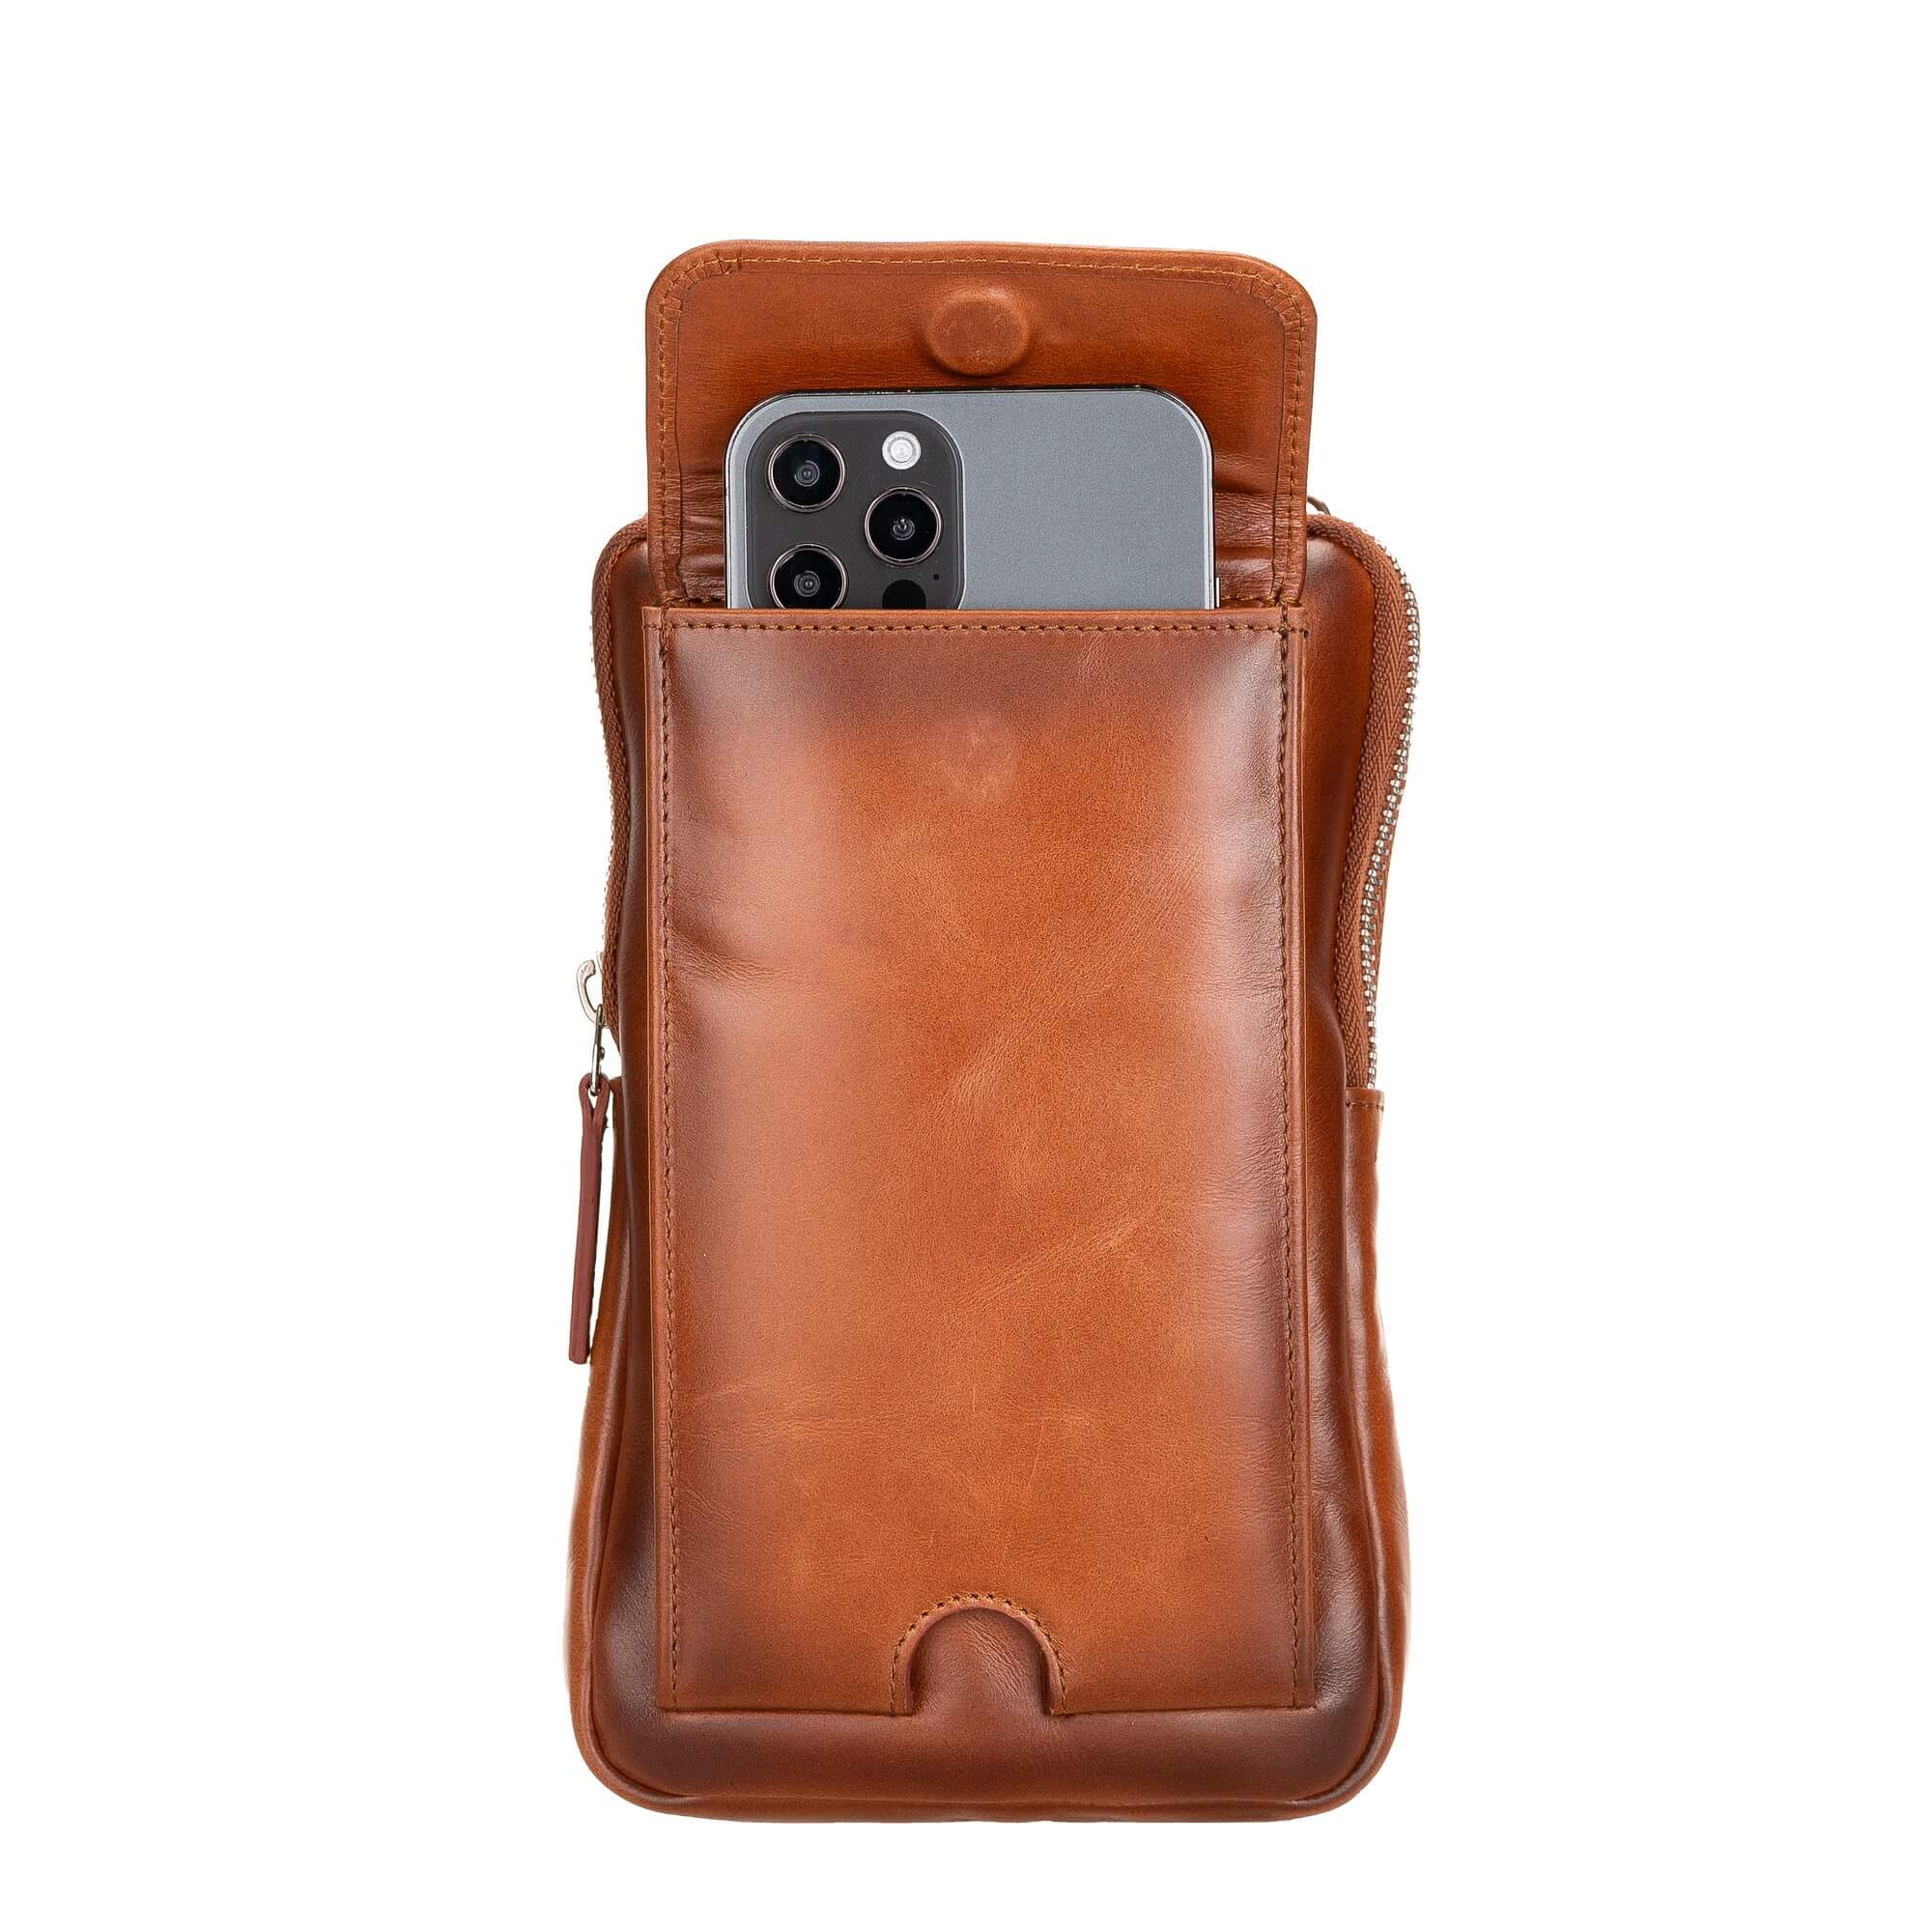 leather phone pouch bag